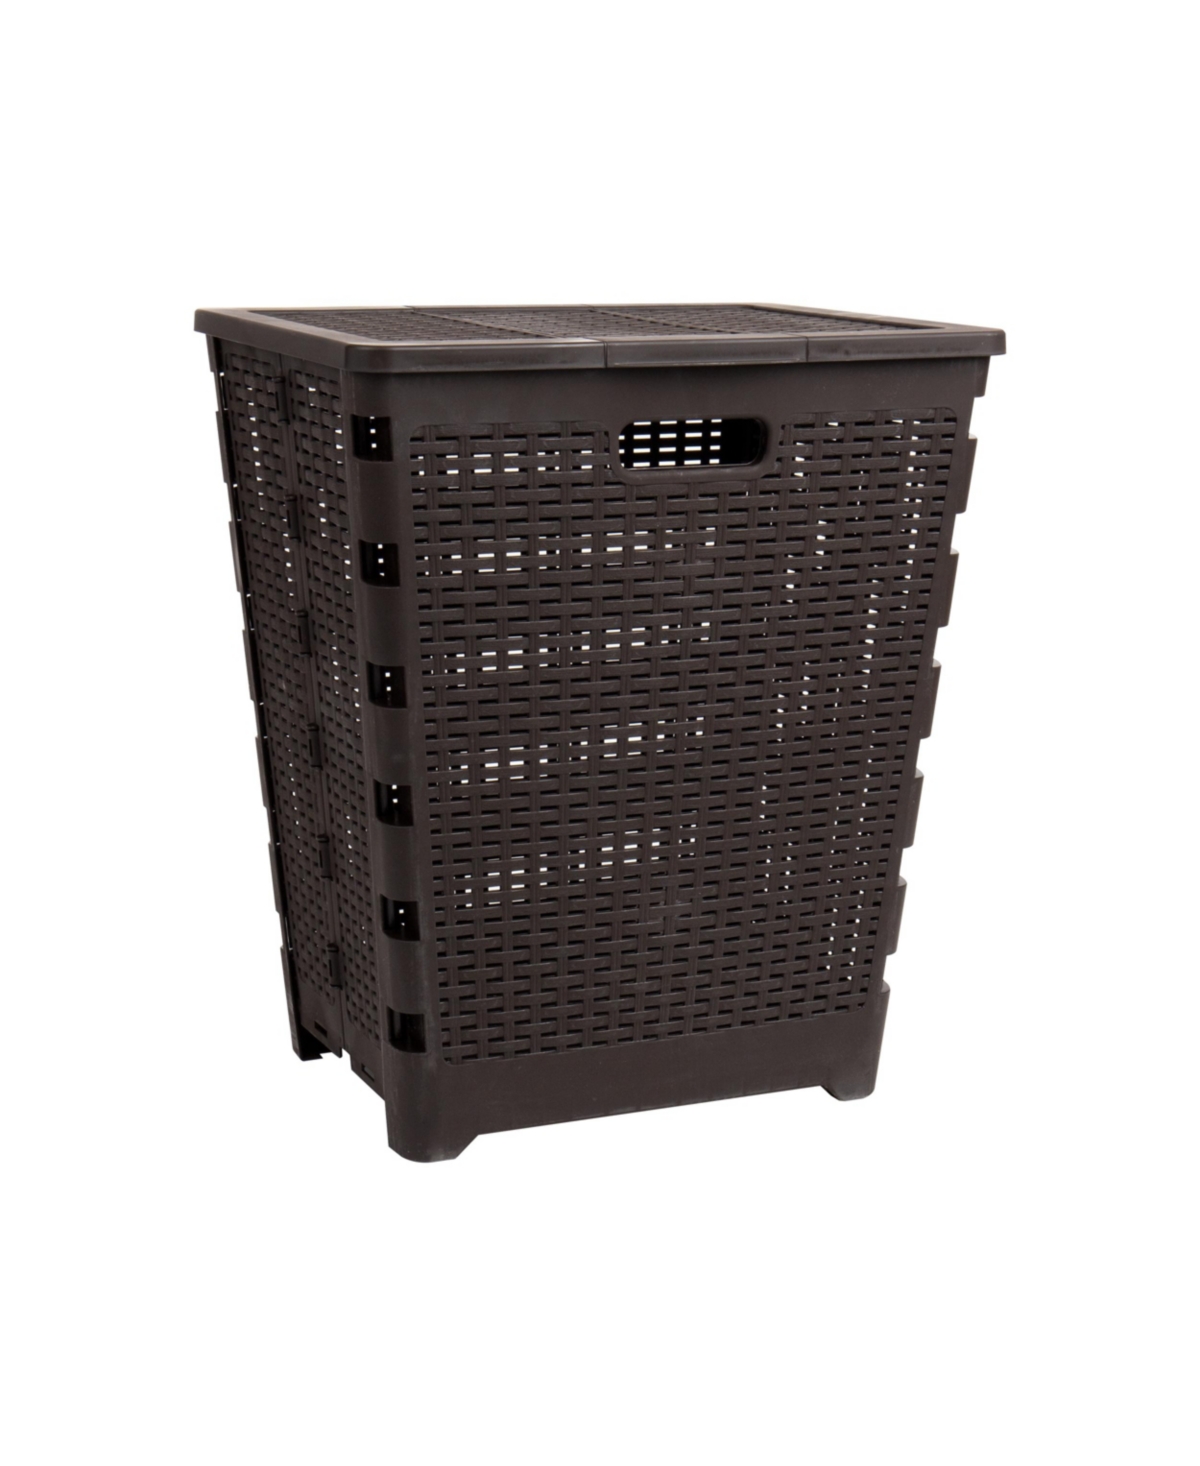 Basket Collection, Foldable Laundry Hamper, 61 Liter 15Kg/33Lbs Capacity, Attached Hinged Lid - Brown